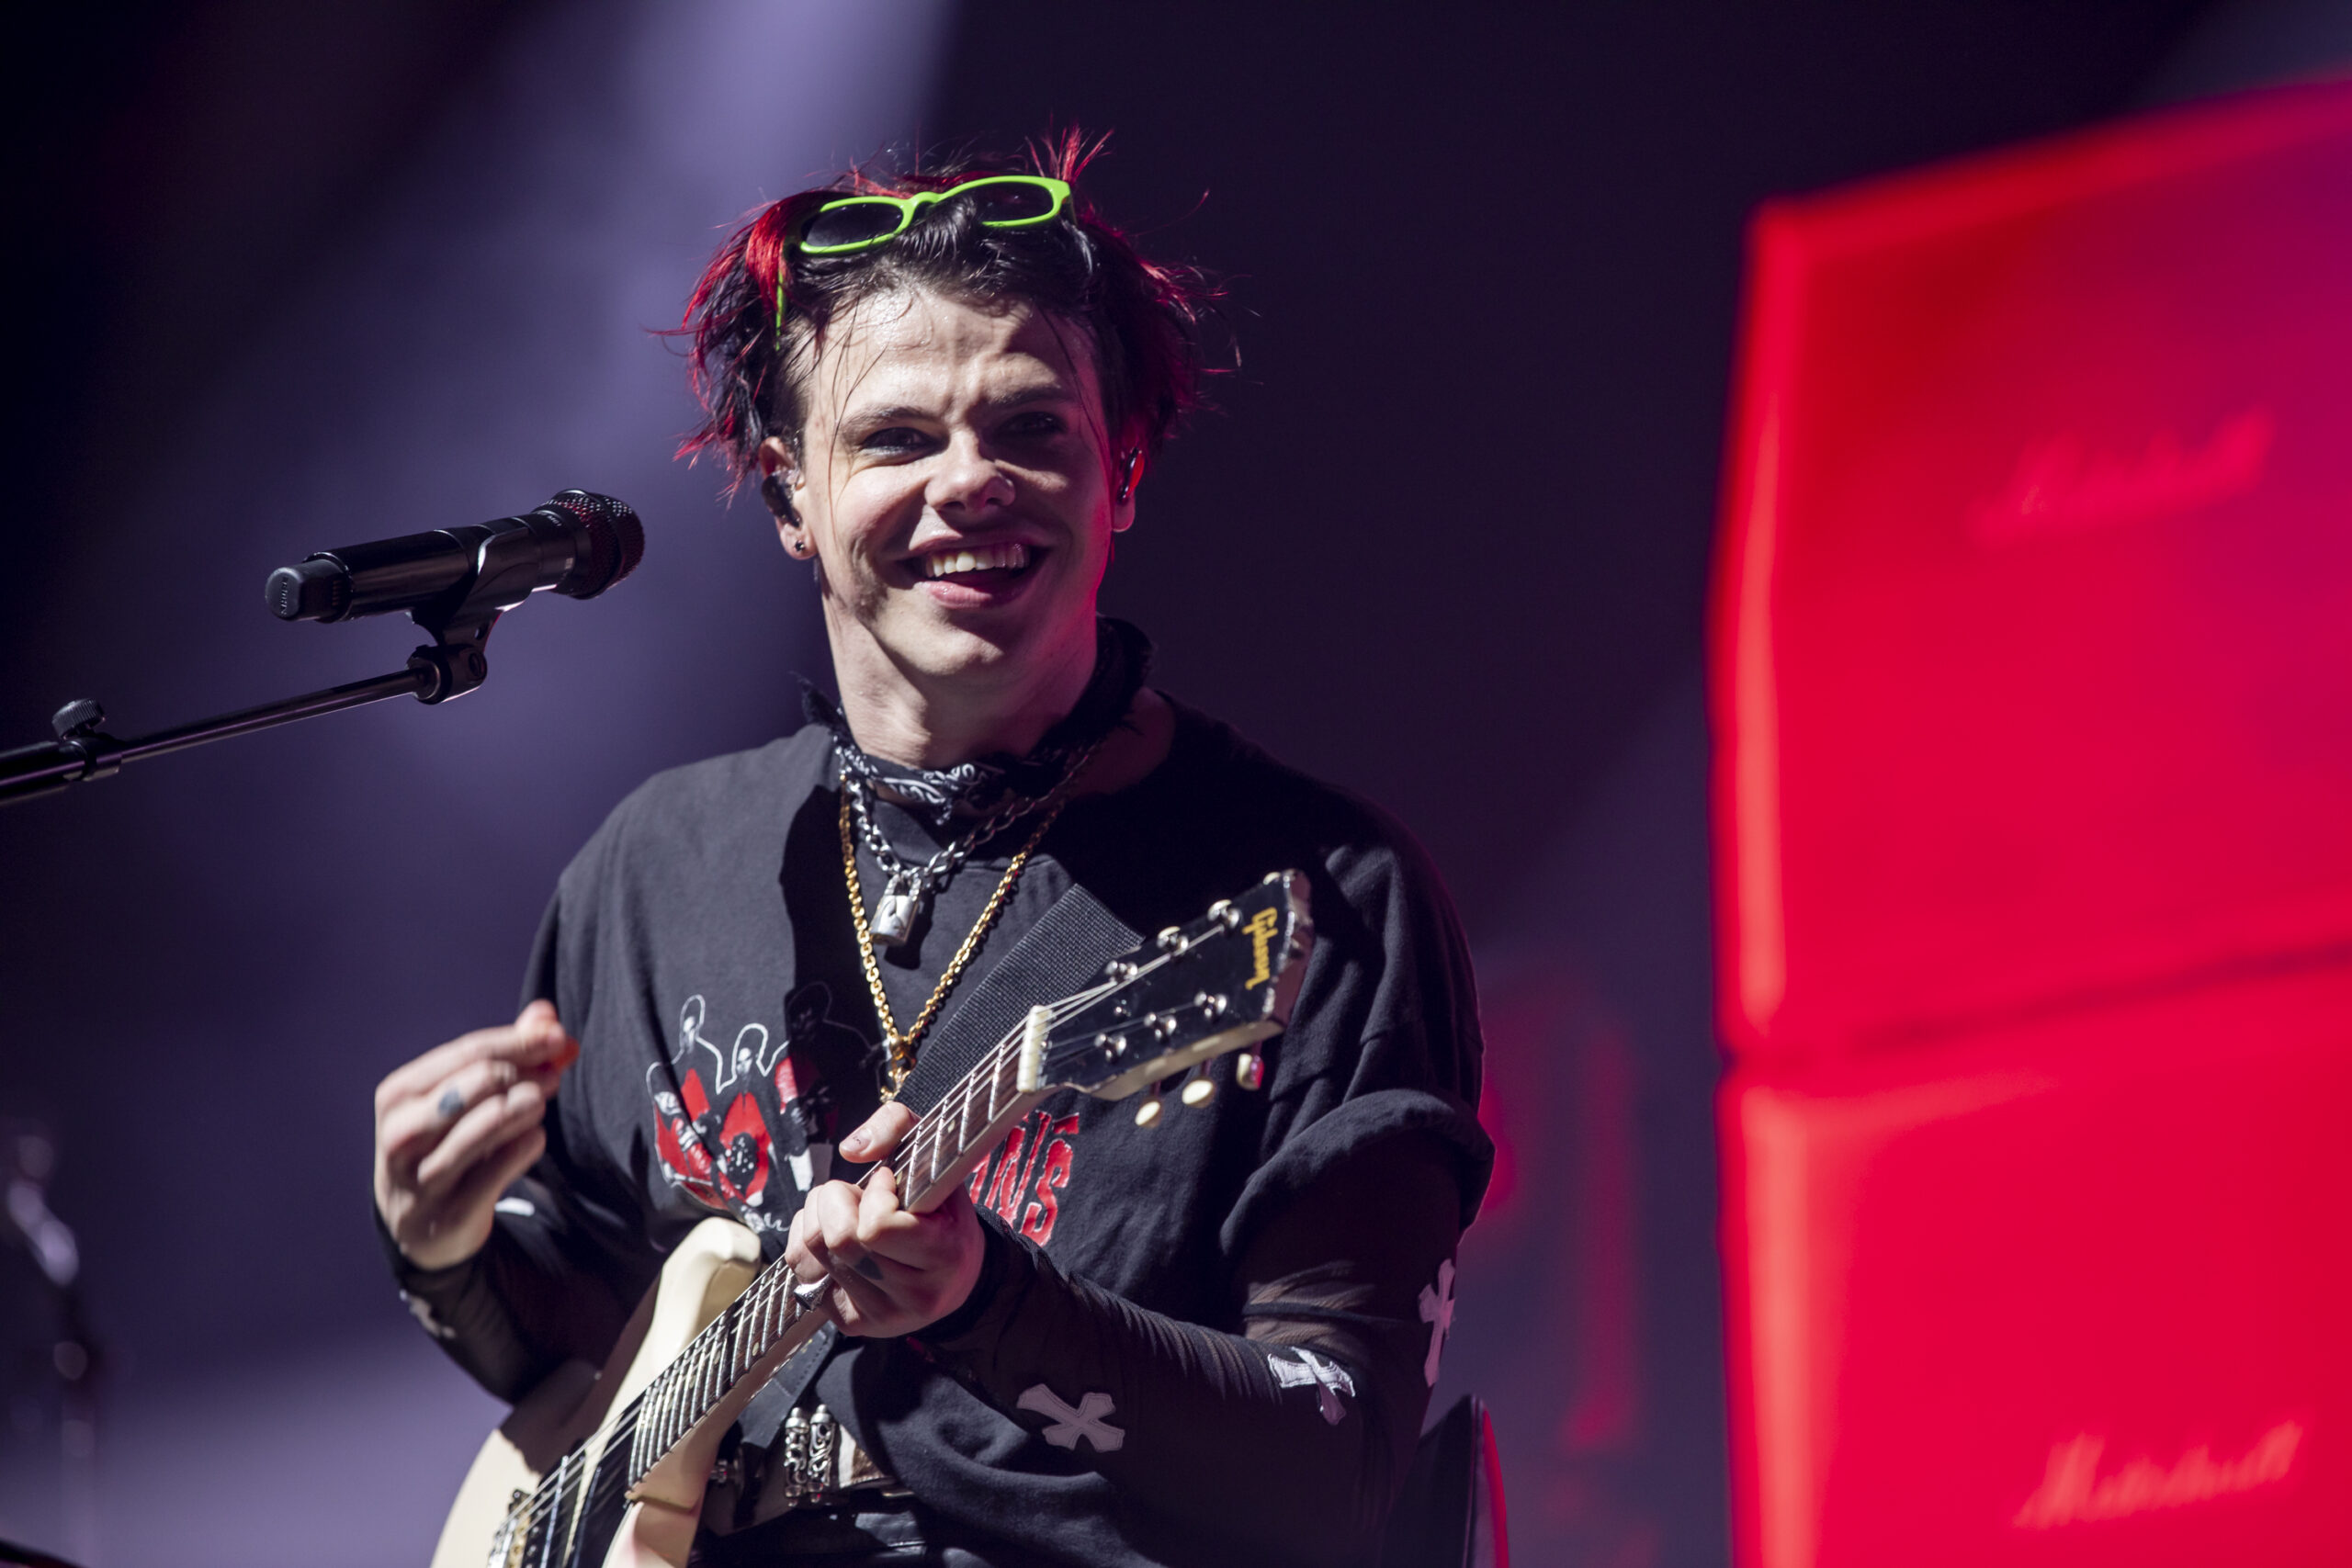 Yungblud and Fans Get Drenched and Shut Down by Police in New Video